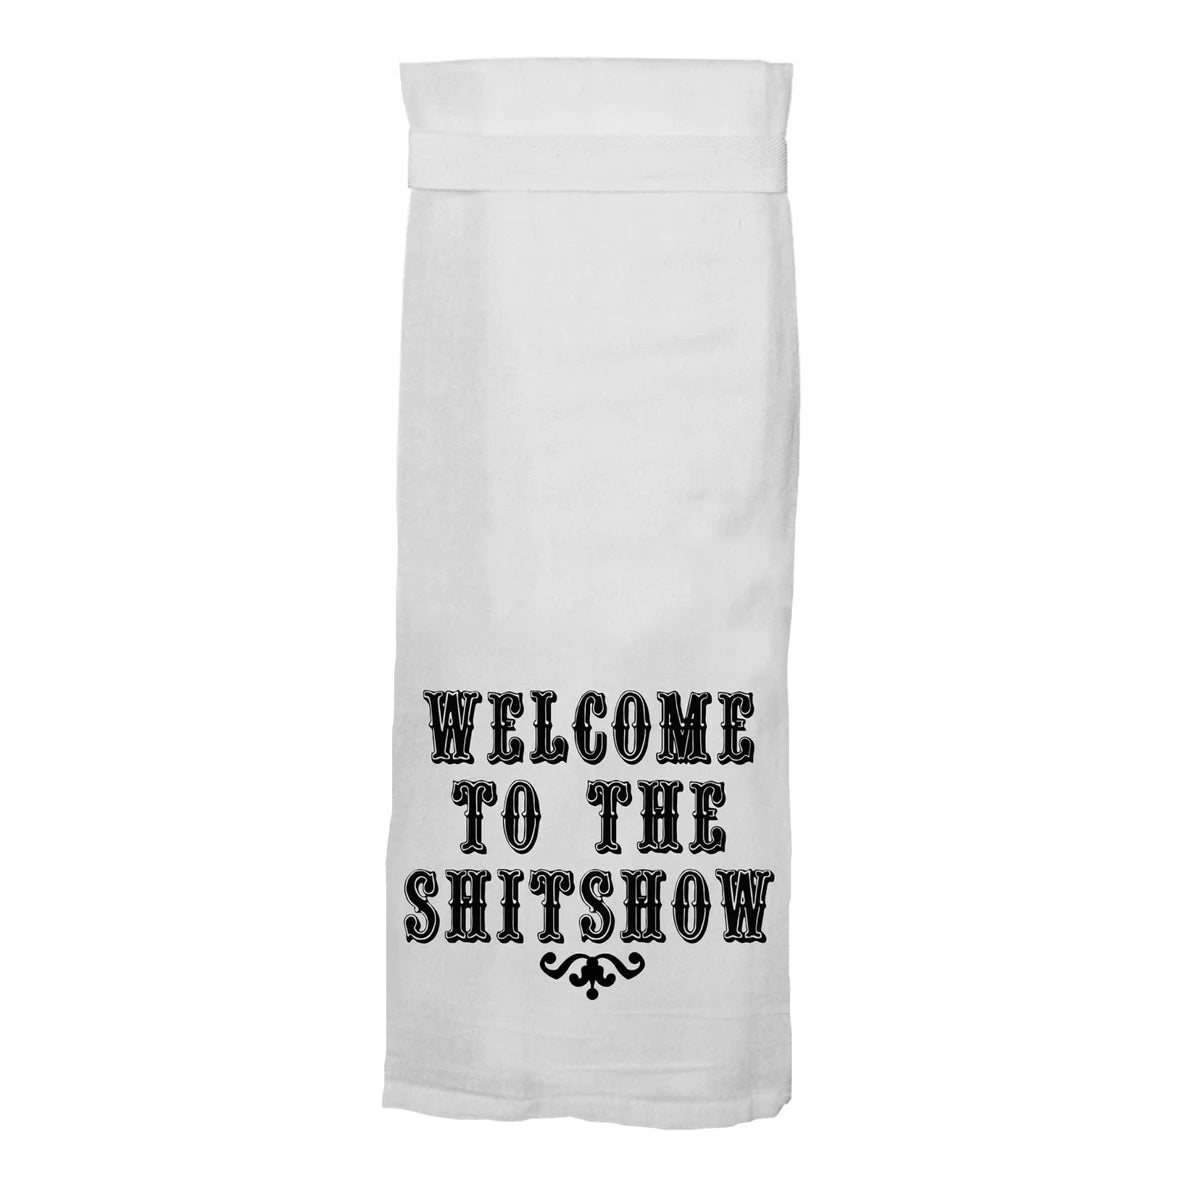 Funny Kitchen Towels From Twisted Wares™ -Please Wash Your Hands Terry